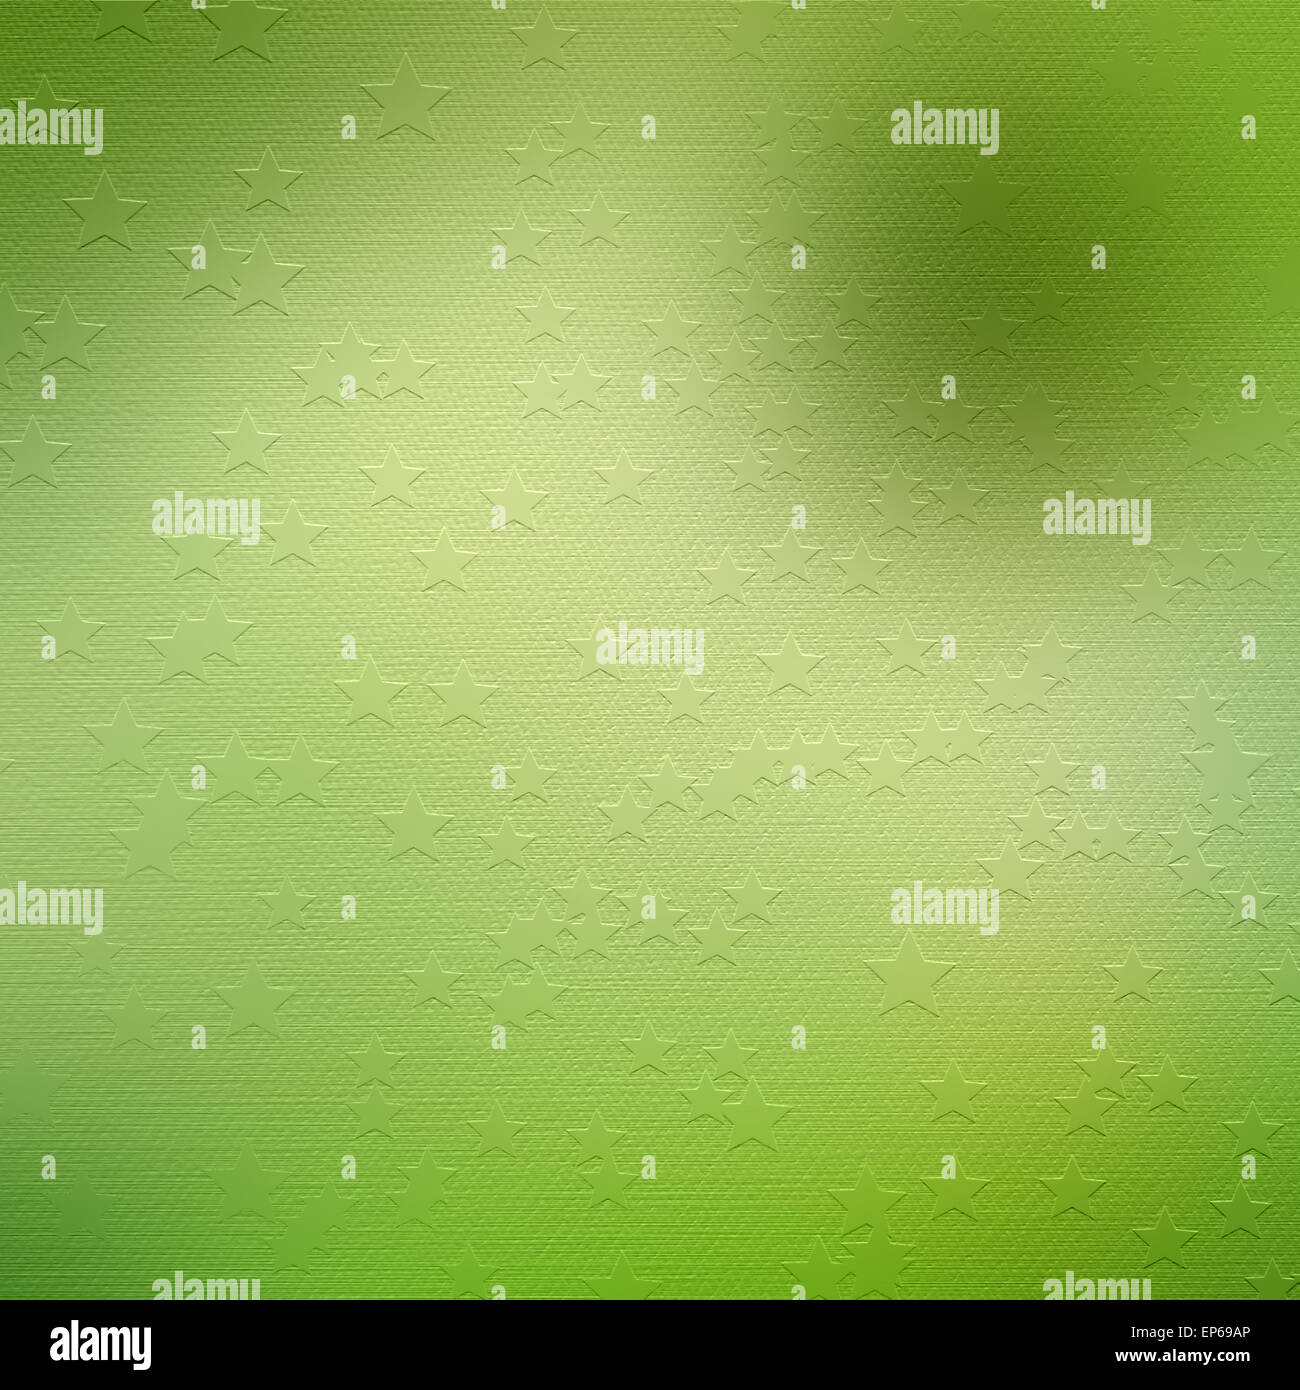 Grunge green background with ancient ornament Stock Photo